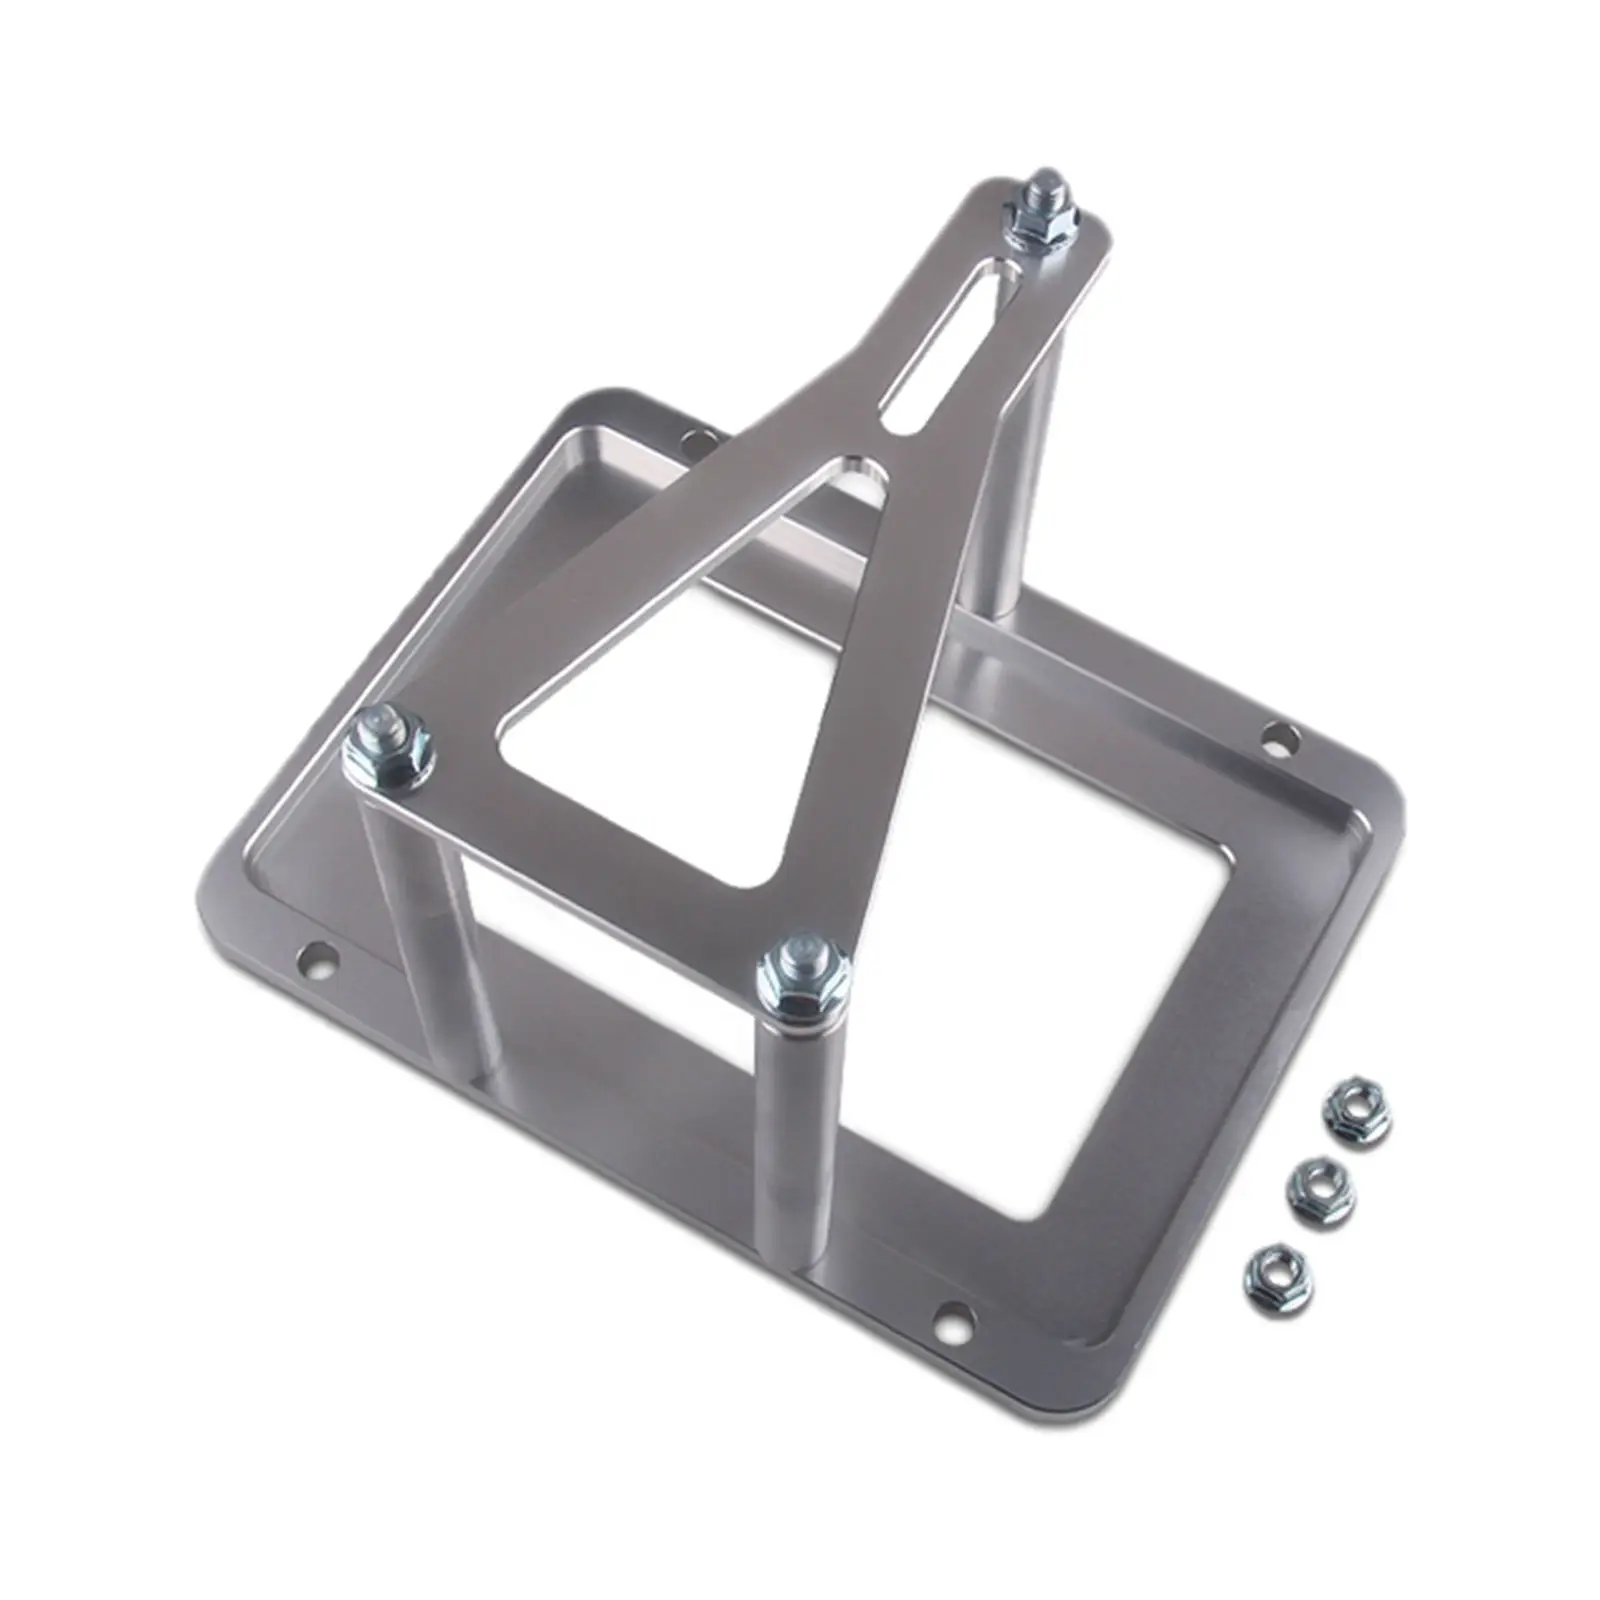 Universal Billet Battery Tray Hold Down Relocation Box Racing Mount for Red Yellow Blue Top for Car and Truck Batteries